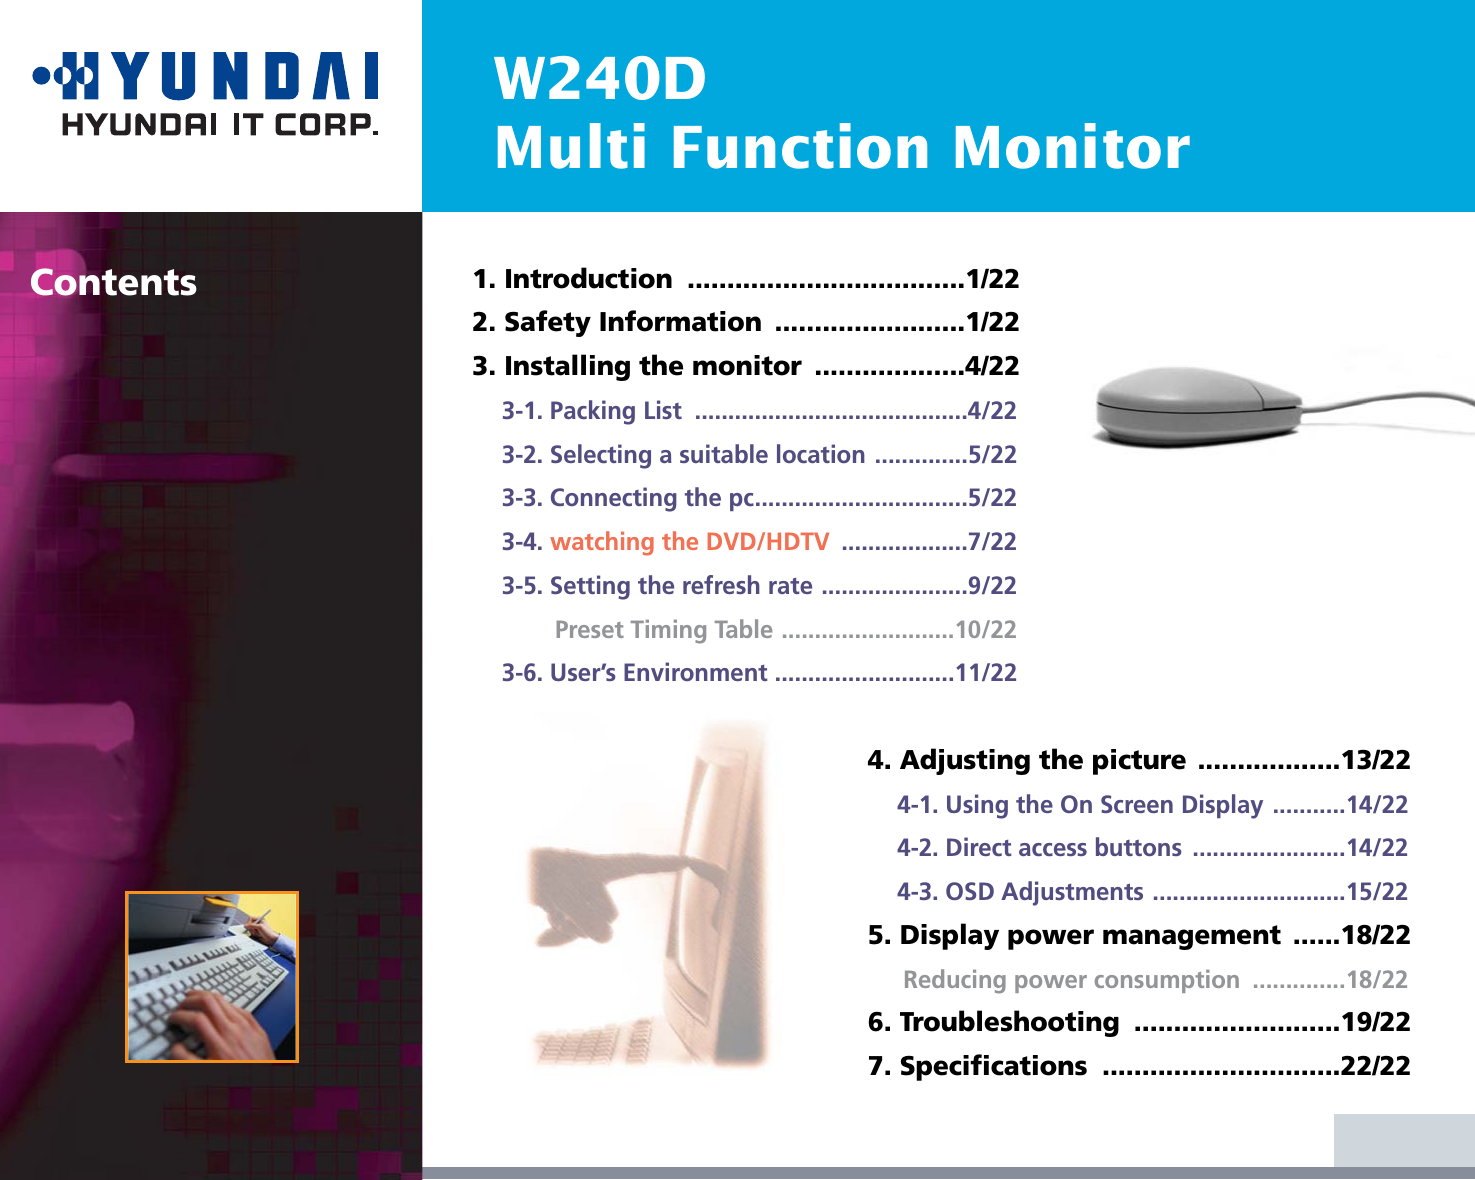 W240DMulti Function MonitorContents 1. Introduction  ...................................1/222. Safety Information  ........................1/223. Installing the monitor  ...................4/223-1. Packing List  .........................................4/223-2. Selecting a suitable location ..............5/223-3. Connecting the pc................................5/223-4. watching the DVD/HDTV ...................7/223-5. Setting the refresh rate ......................9/22Preset Timing Table ..........................10/223-6. User’s Environment ...........................11/224. Adjusting the picture ..................13/224-1. Using the On Screen Display ...........14/224-2. Direct access buttons  .......................14/224-3. OSD Adjustments .............................15/225. Display power management  ......18/22Reducing power consumption  ..............18/226. Troubleshooting  ..........................19/227. Specifications  ..............................22/22